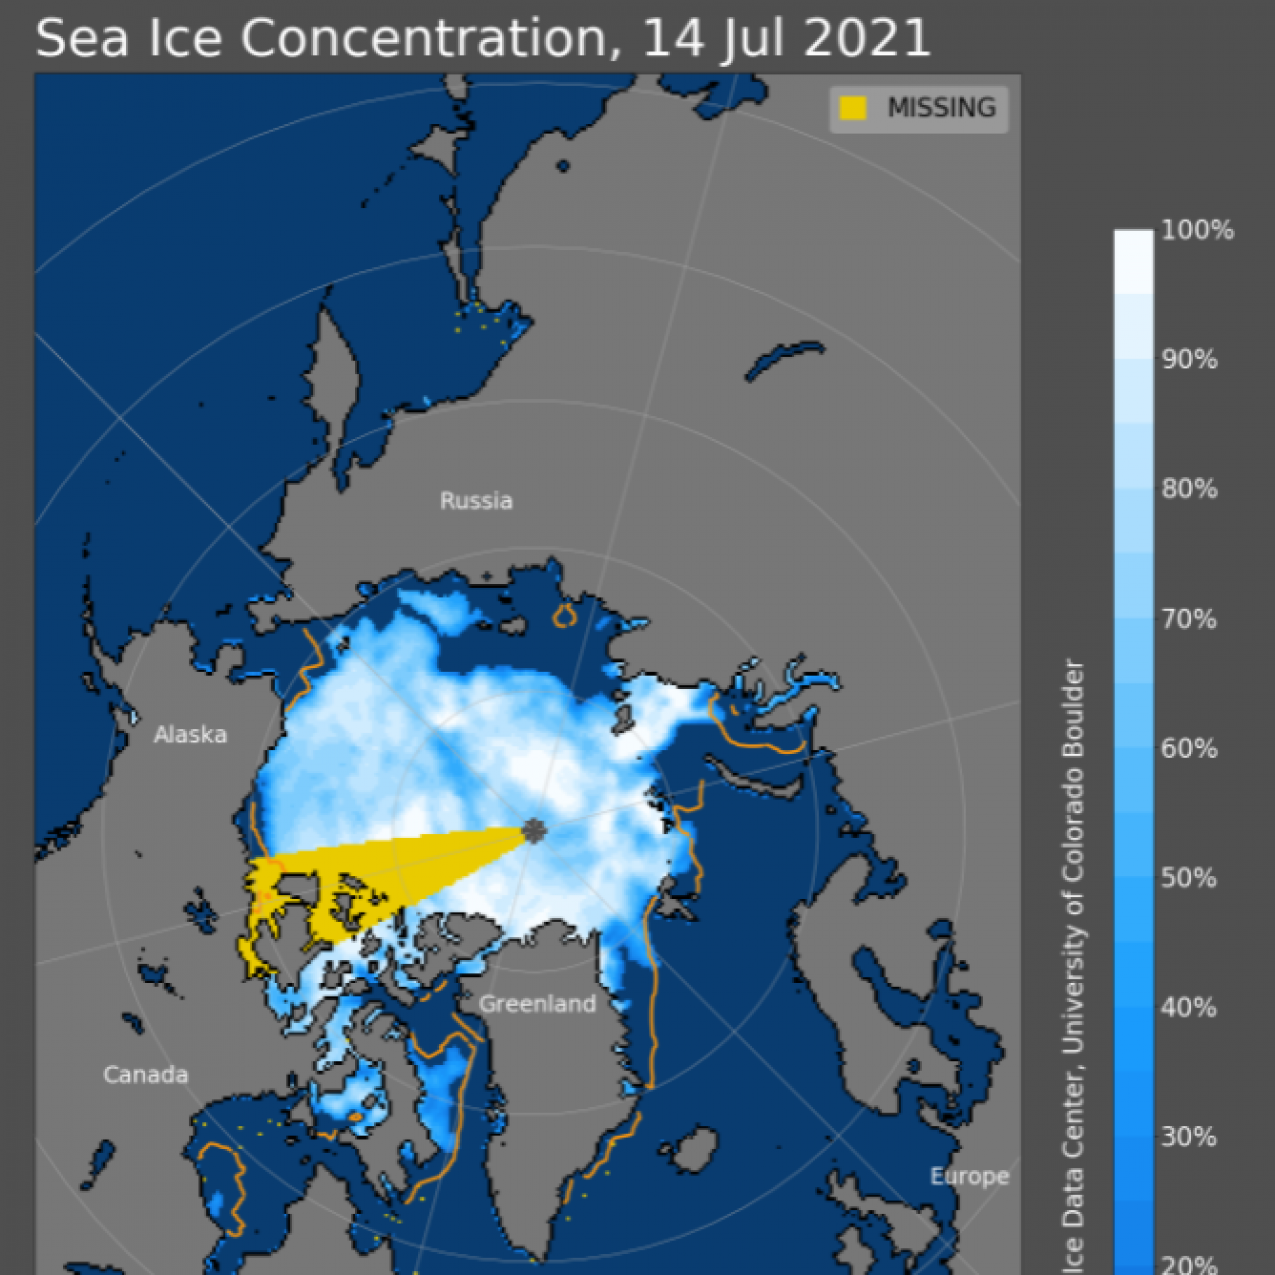 An image of sea ice concentration in the Arctic. The yellow section indicates missing data. The varied colors of blue indicate sea ice concentration, with white areas being the most concentrated.